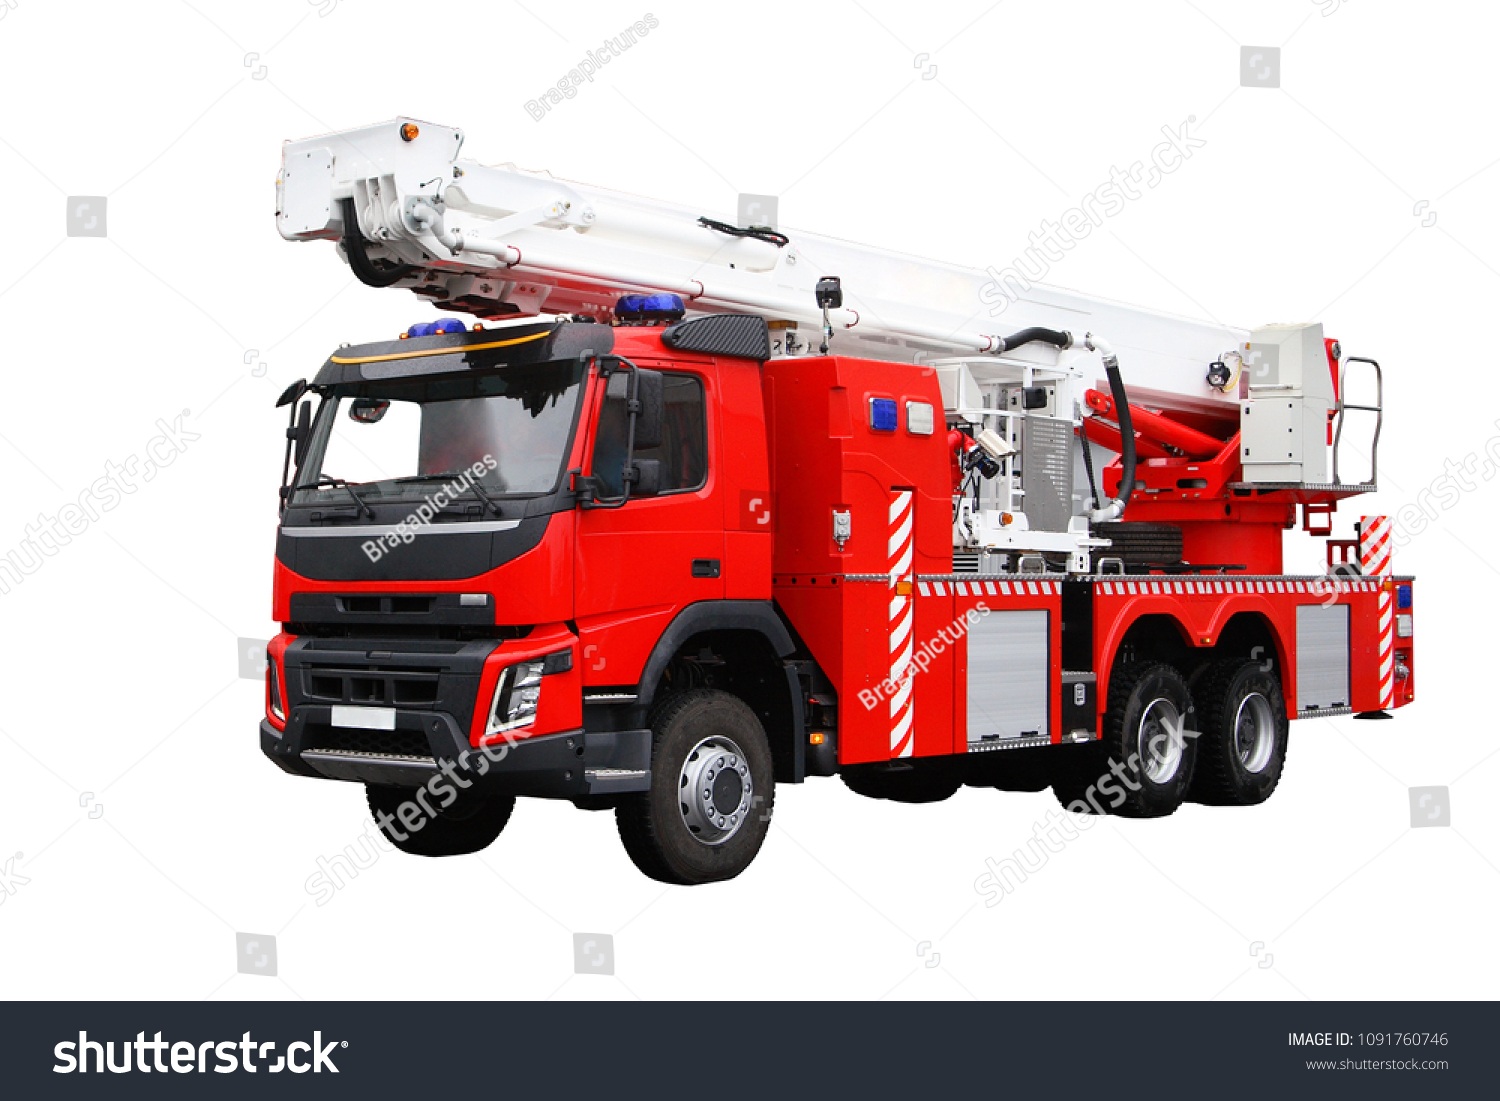 Fire rescue vehicle. Big red rescue car of Russia, isolated on white. #1091760746